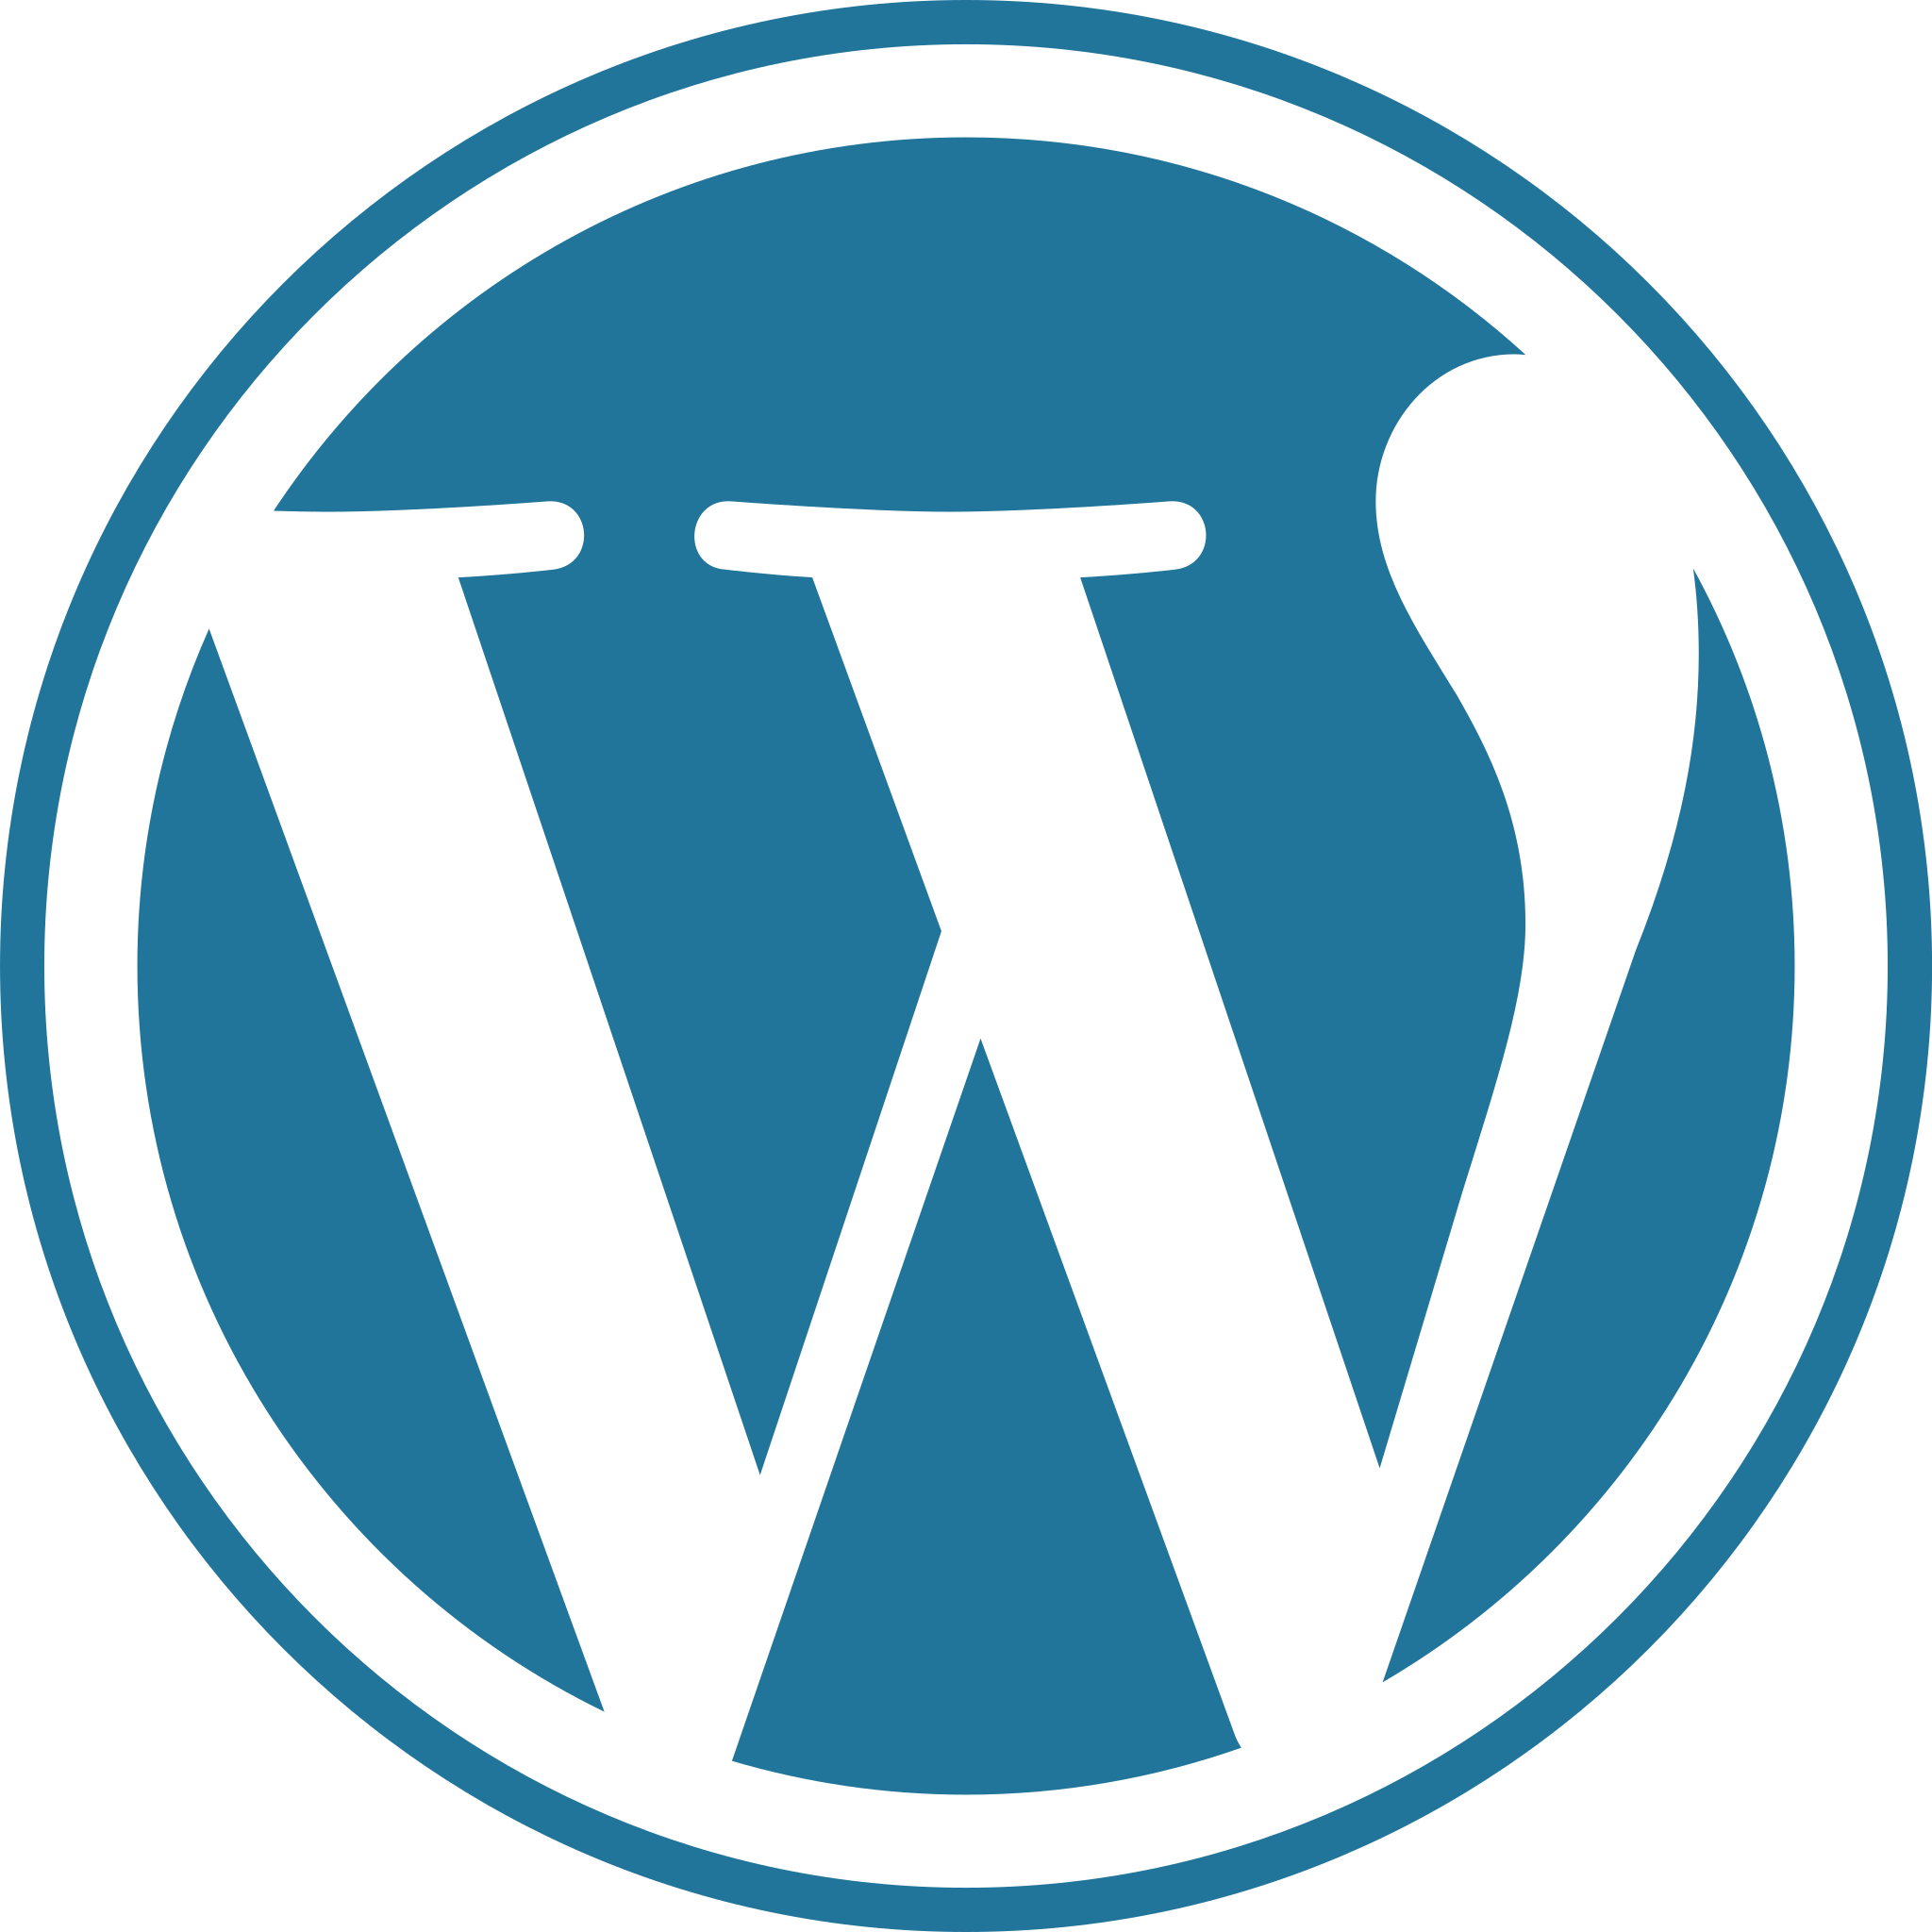 get the most out of your virtual office - WordPress_blue_logo.svg